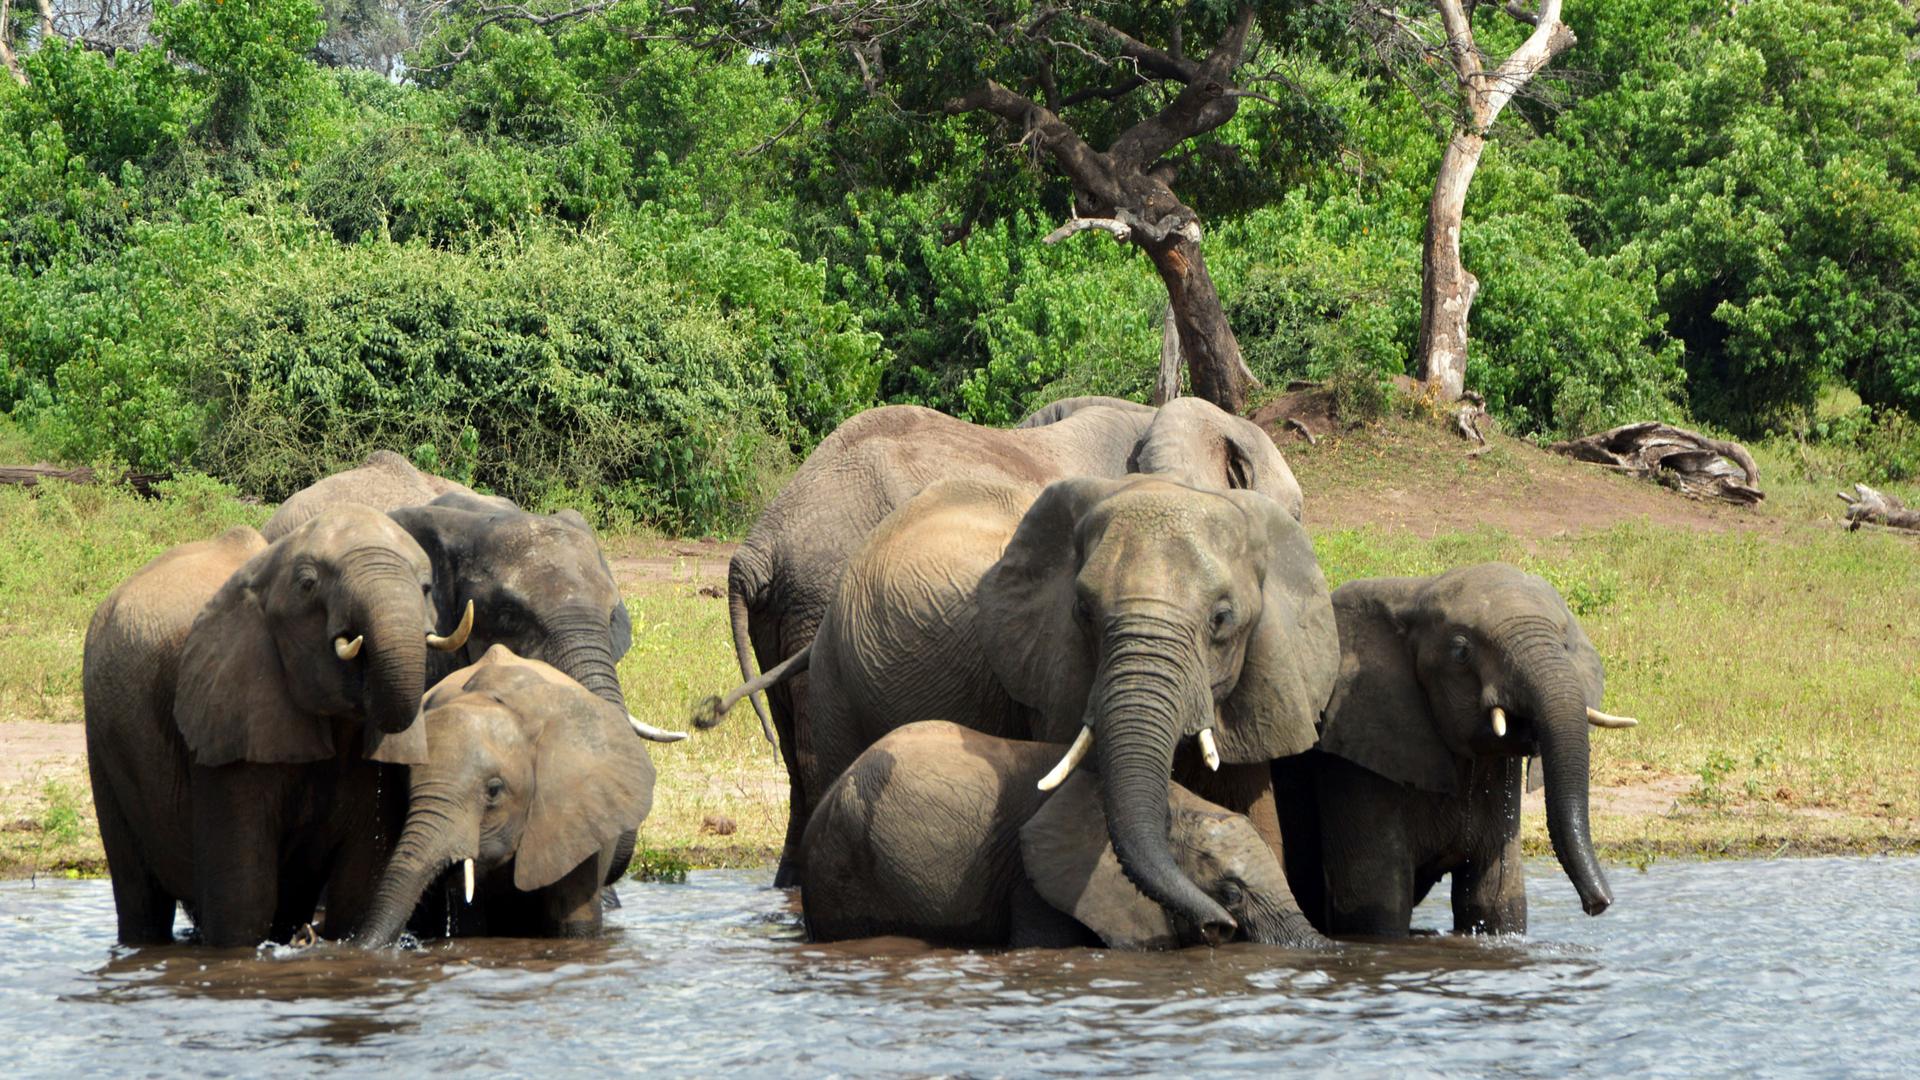 Elephants in the Chobe National Park in Botswana on March 3, 2013. 